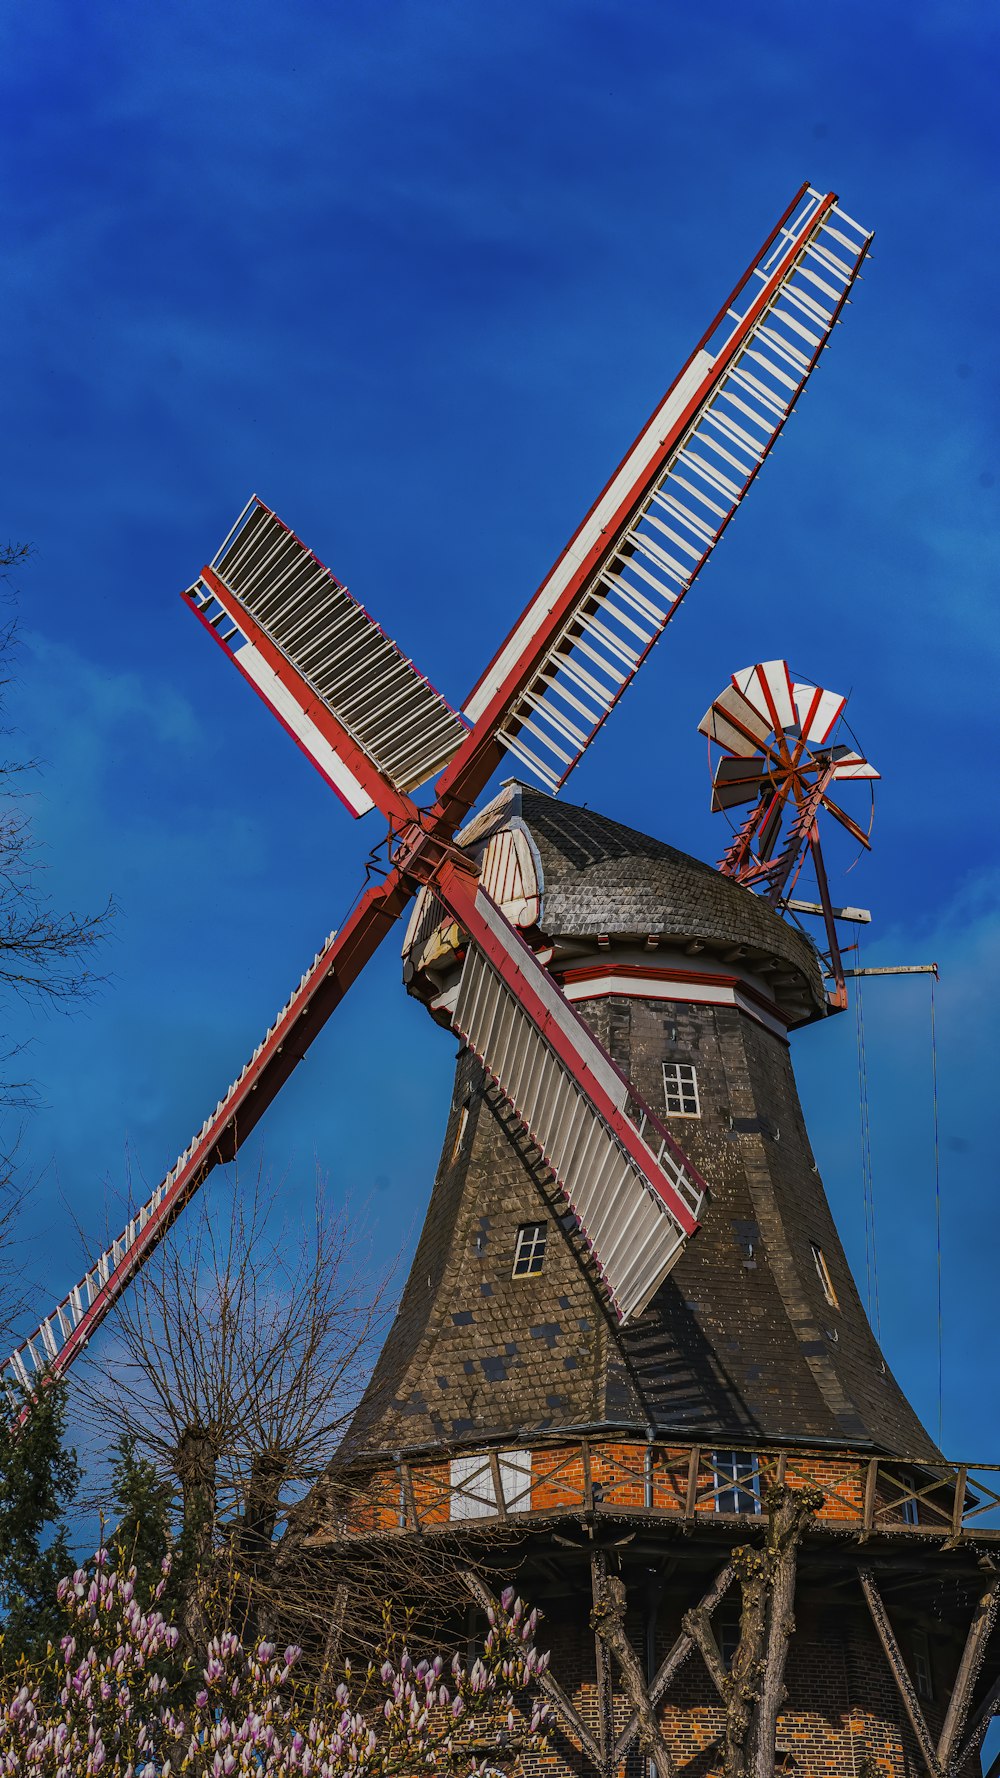 a windmill with a red, white and blue design on it